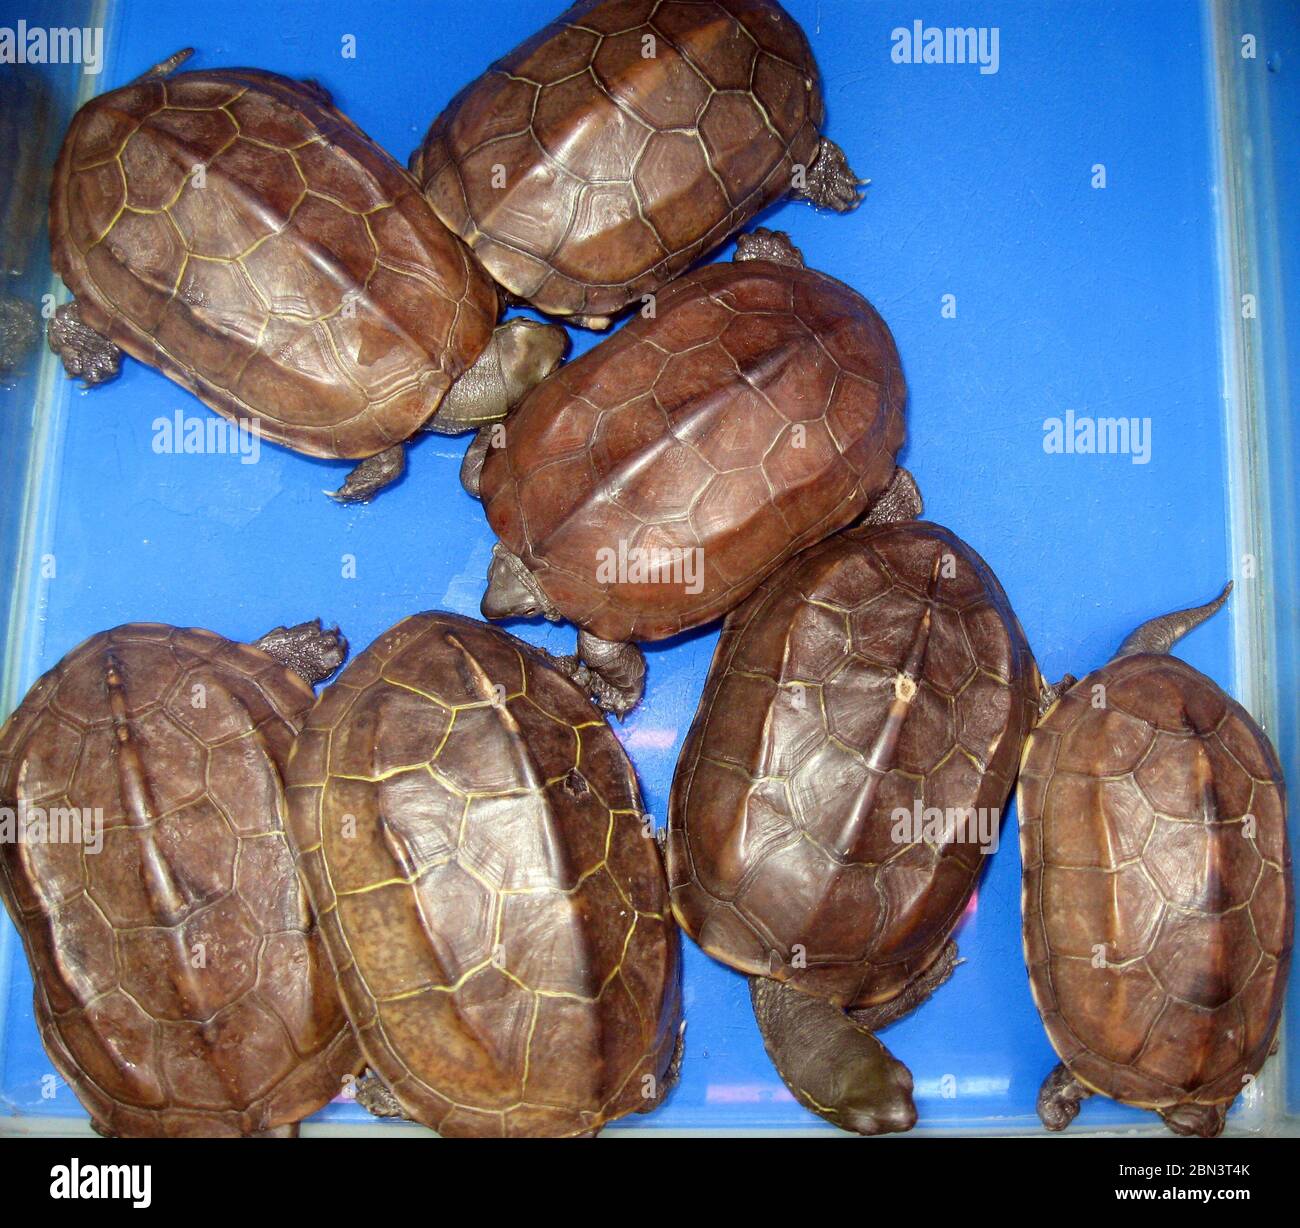 Mauremys (Chinemys) reevesii, commonly known as the Chinese pond turtle, for sale at Hong Kong market food. Stock Photo